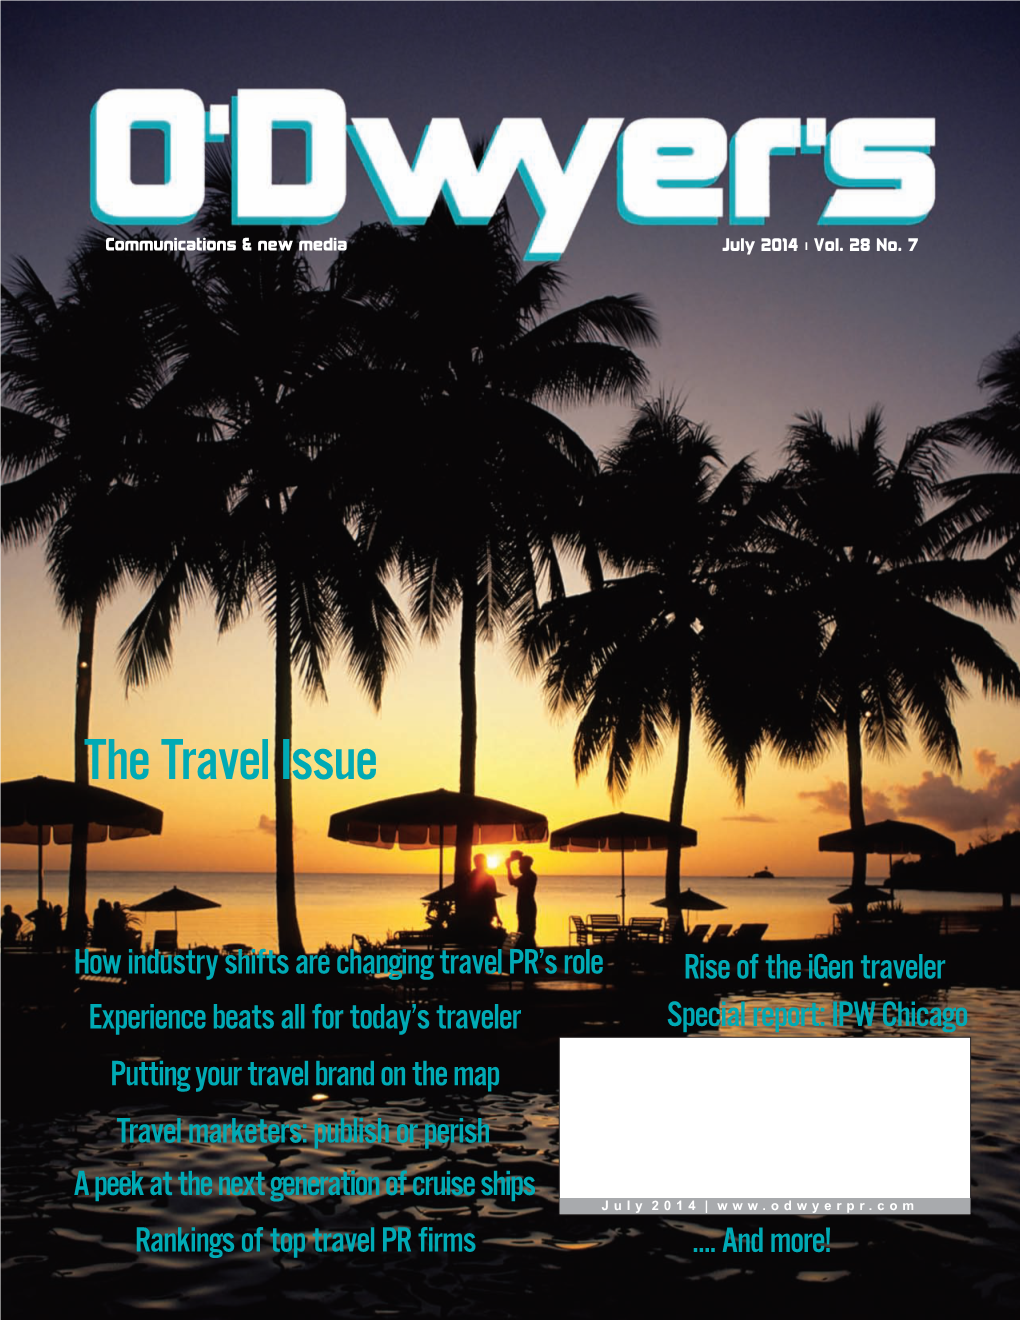 The Travel Issue